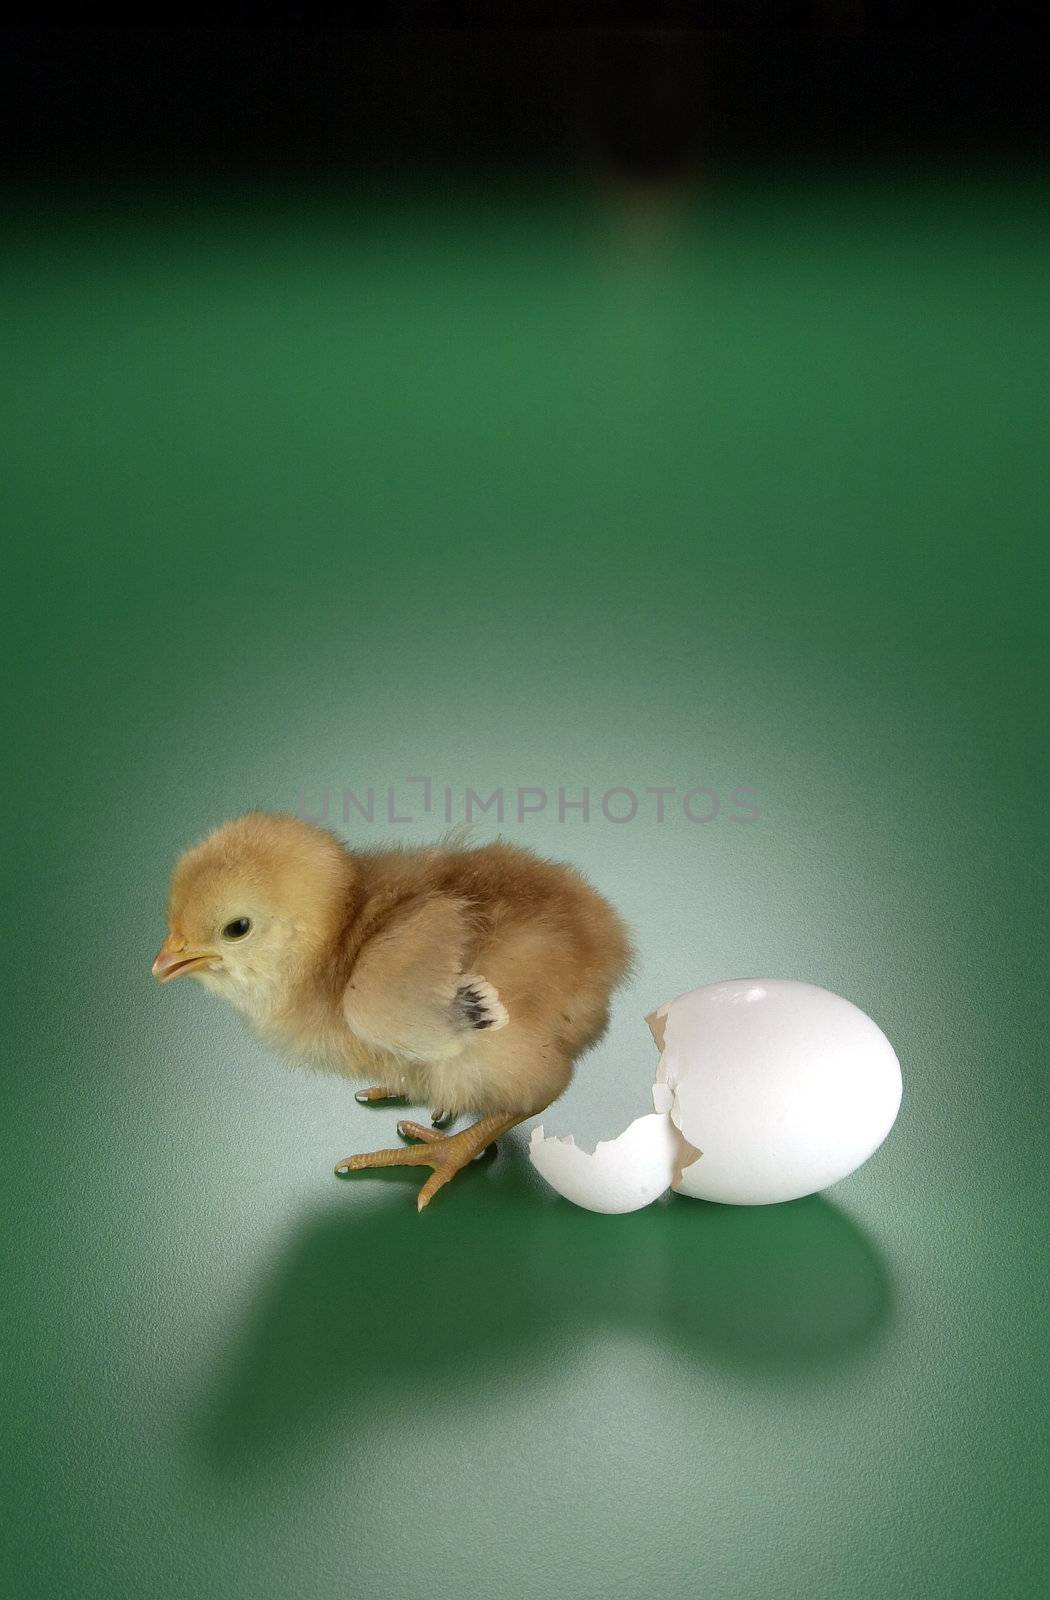 Chicken and egg by f/2sumicron